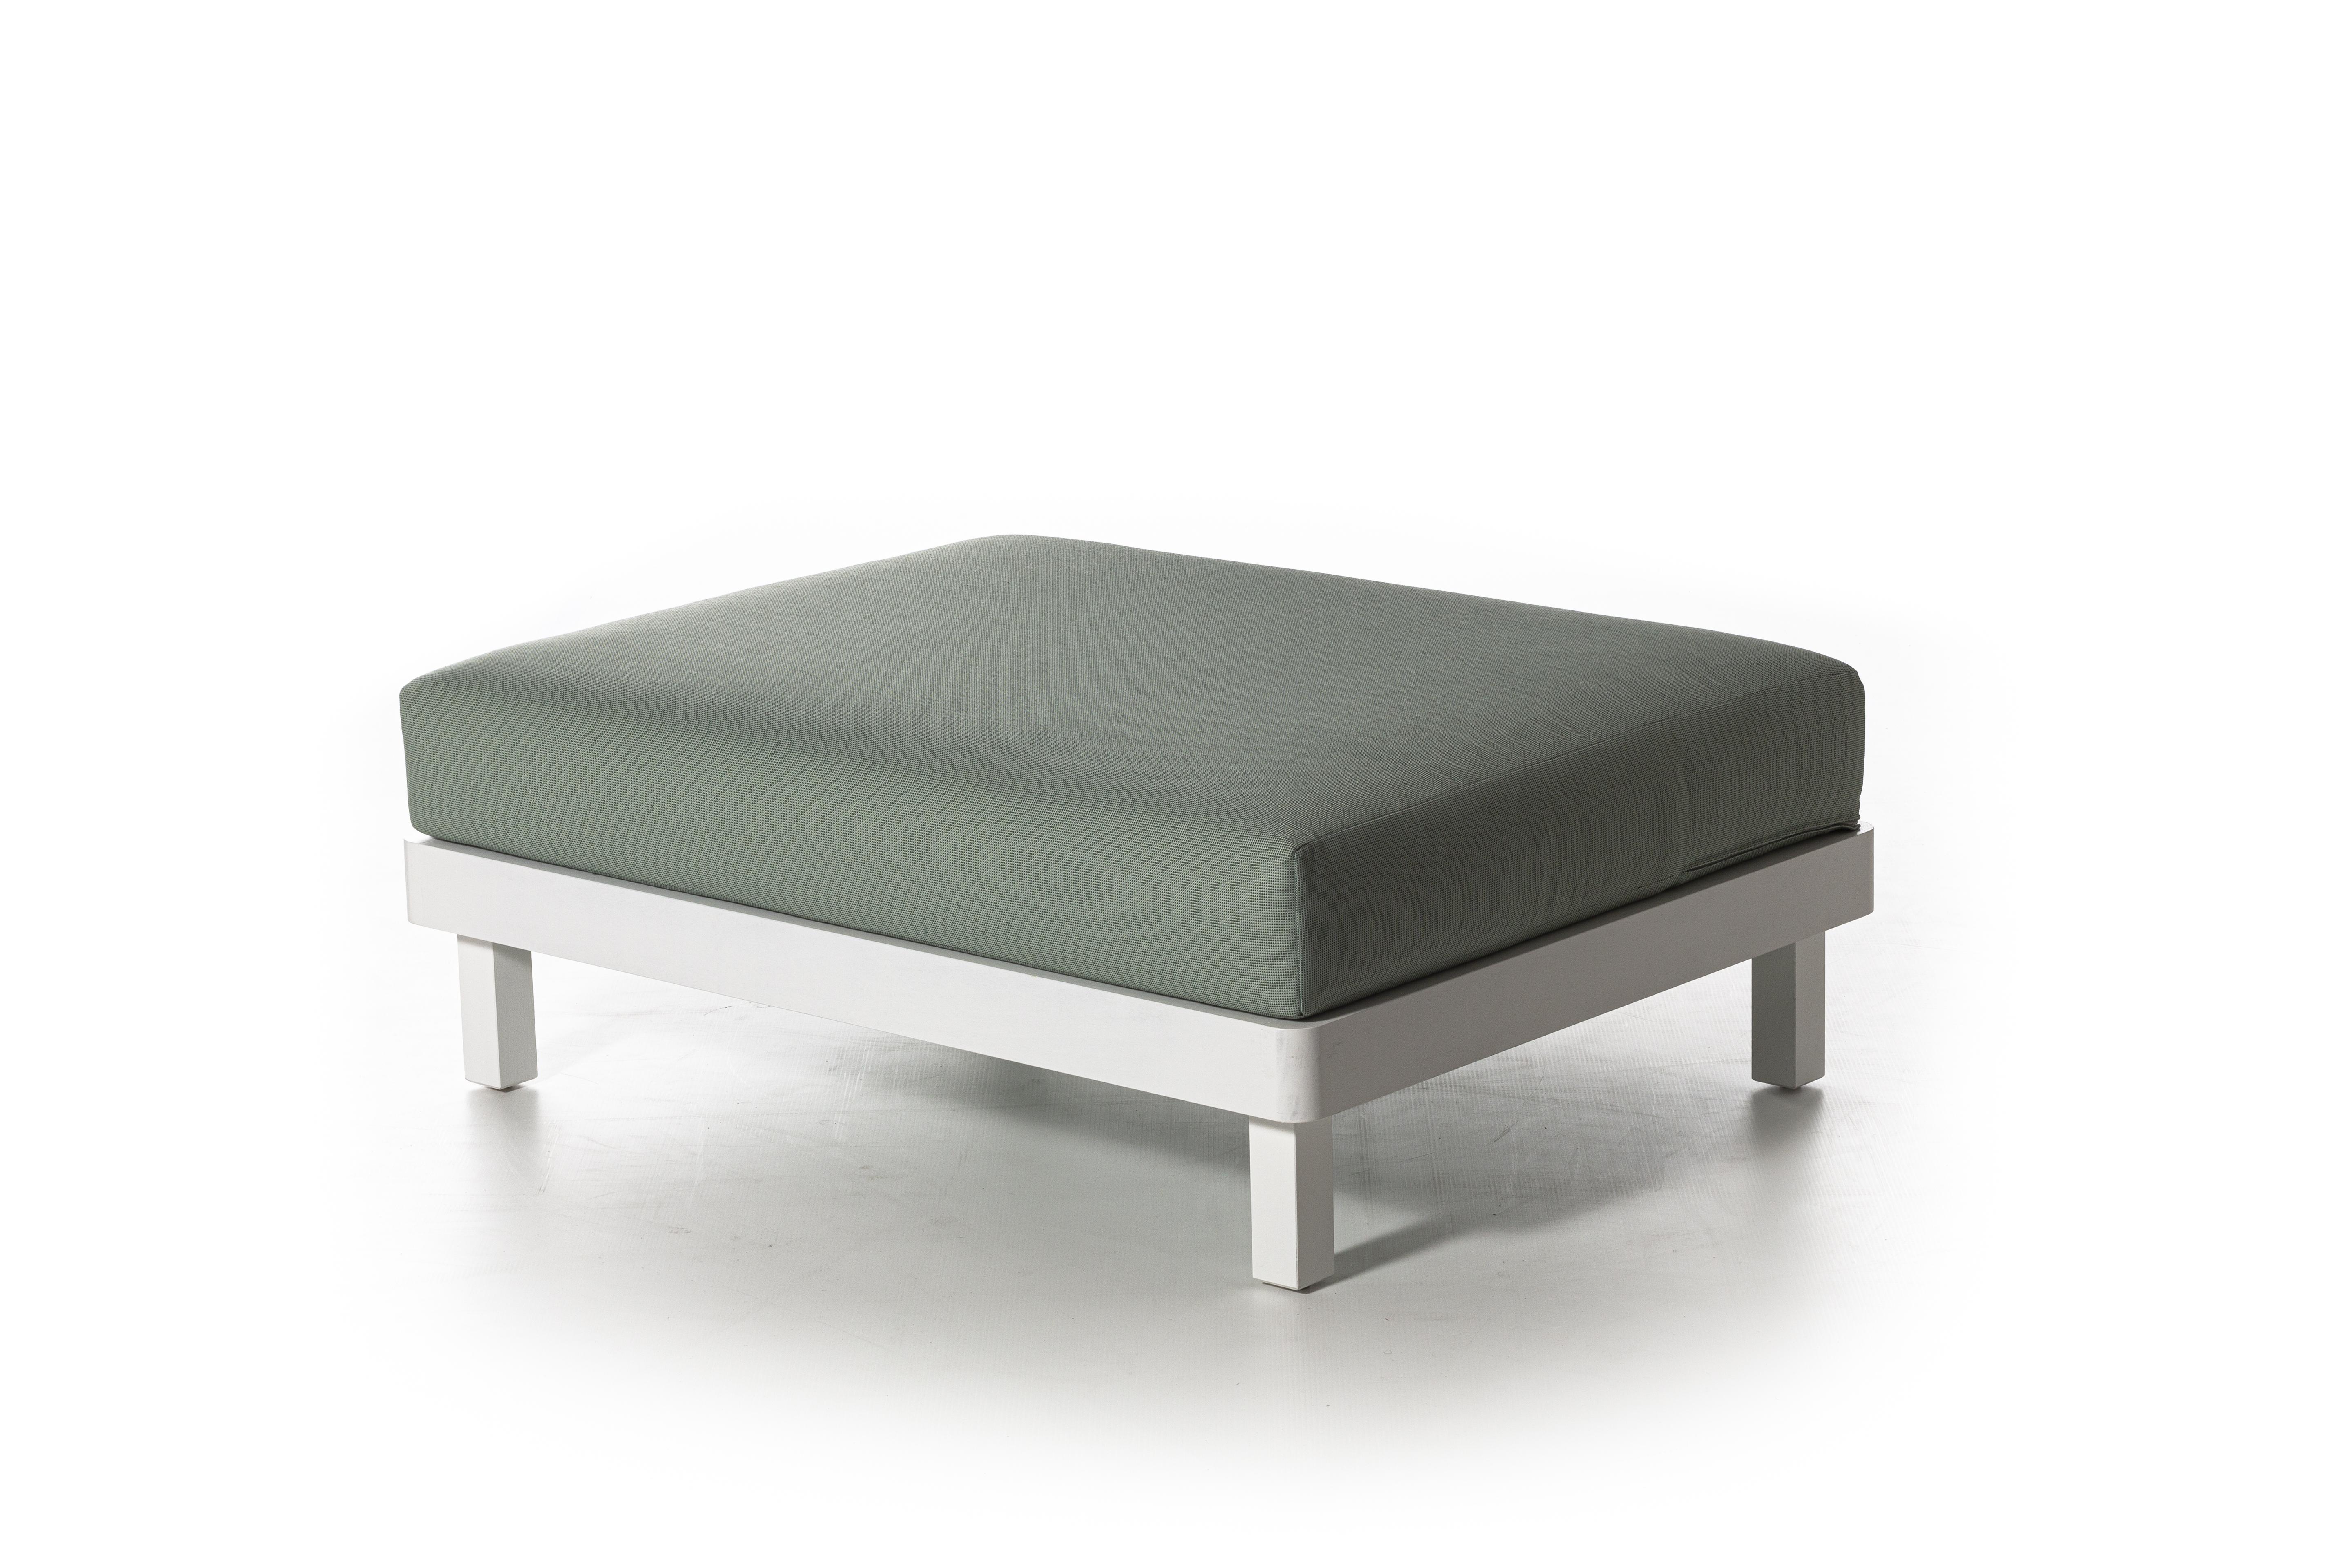 
The WIN 08 pouf has a rectangular shape and is characterised by a white or grey painted aluminium structure on which a soft cushion with removable upholstery is placed.

Pouf in white or gray lacquered aluminum. Cushion with removable